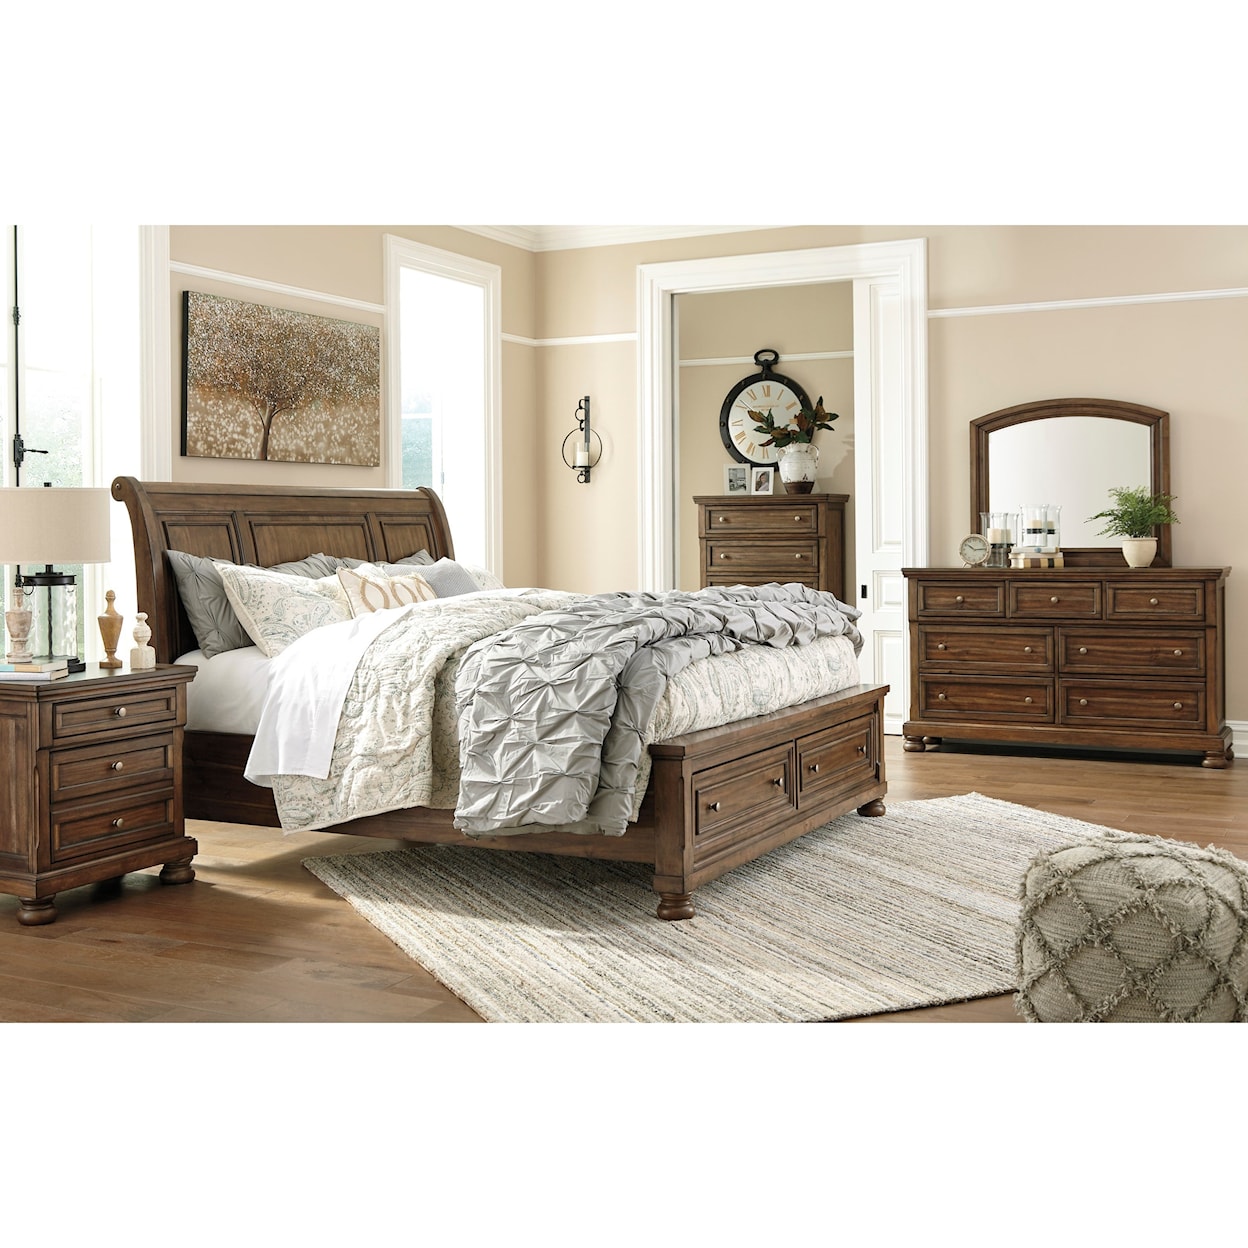 Signature Design by Ashley Flynnter California King Bedroom Group